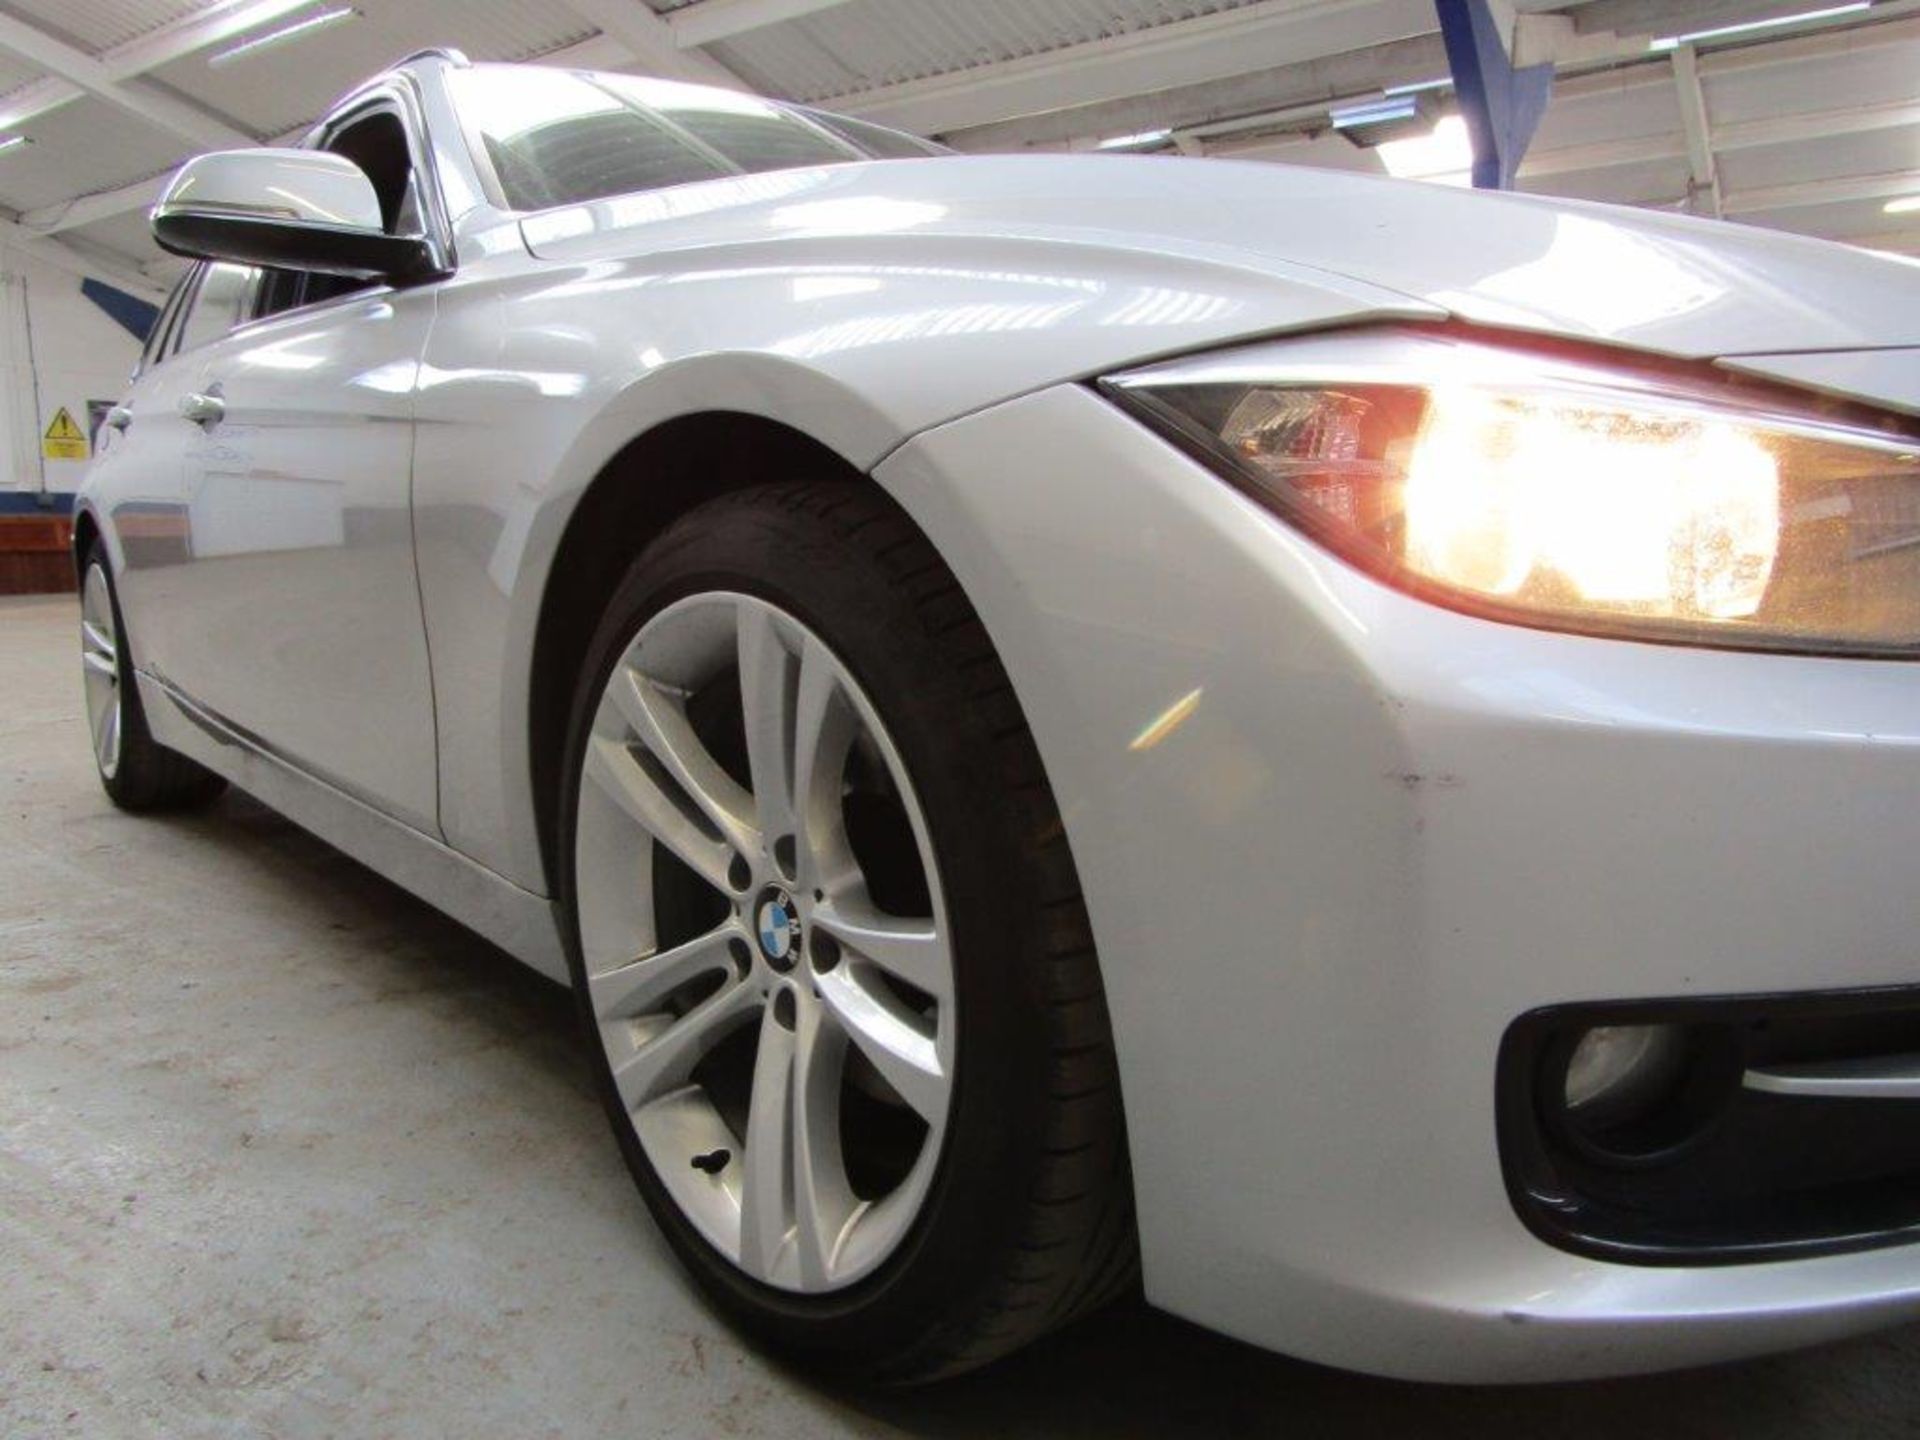 62 12 BMW 320D Sport Touring - Image 9 of 29